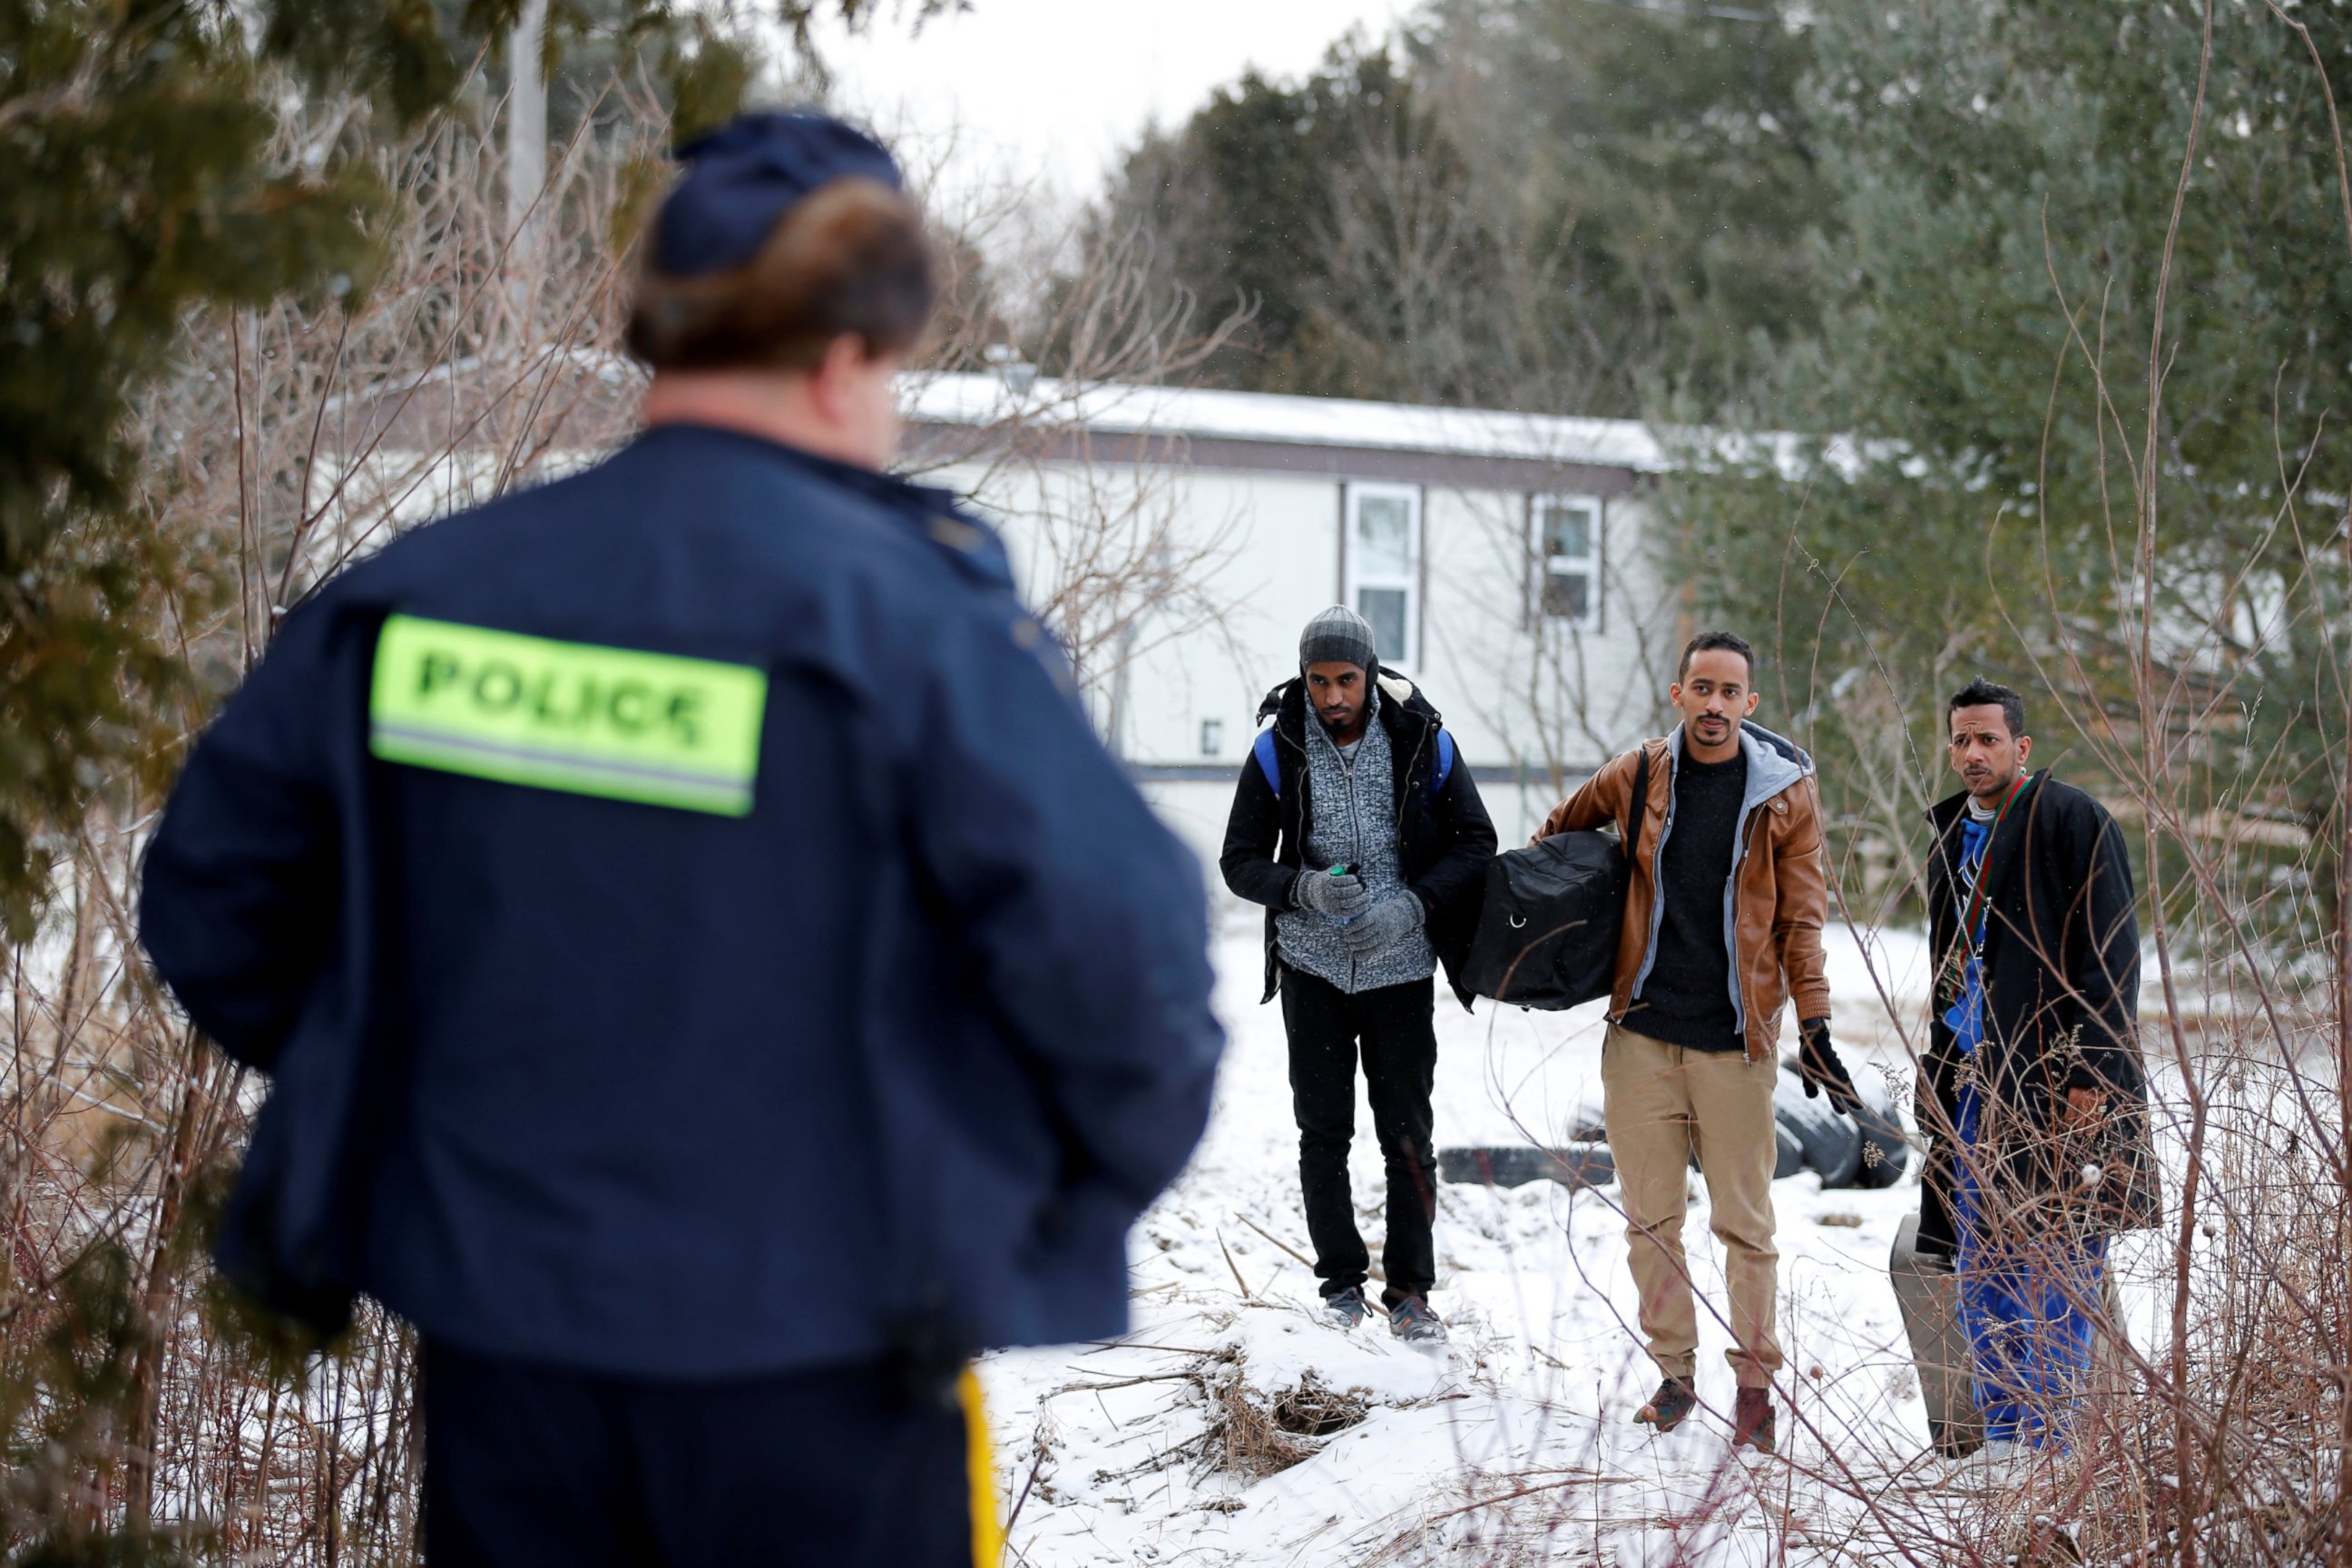 PHOTO: Three men who claimed to be from Sudan and were driven by taxi driver Curtis Seymour, are confronted by Royal Canadian Mounted Police (RCMP) as they prepare to cross illegally the U.S.-Canada border into Hemmingford, Quebec, Canada, March 4, 2017. 